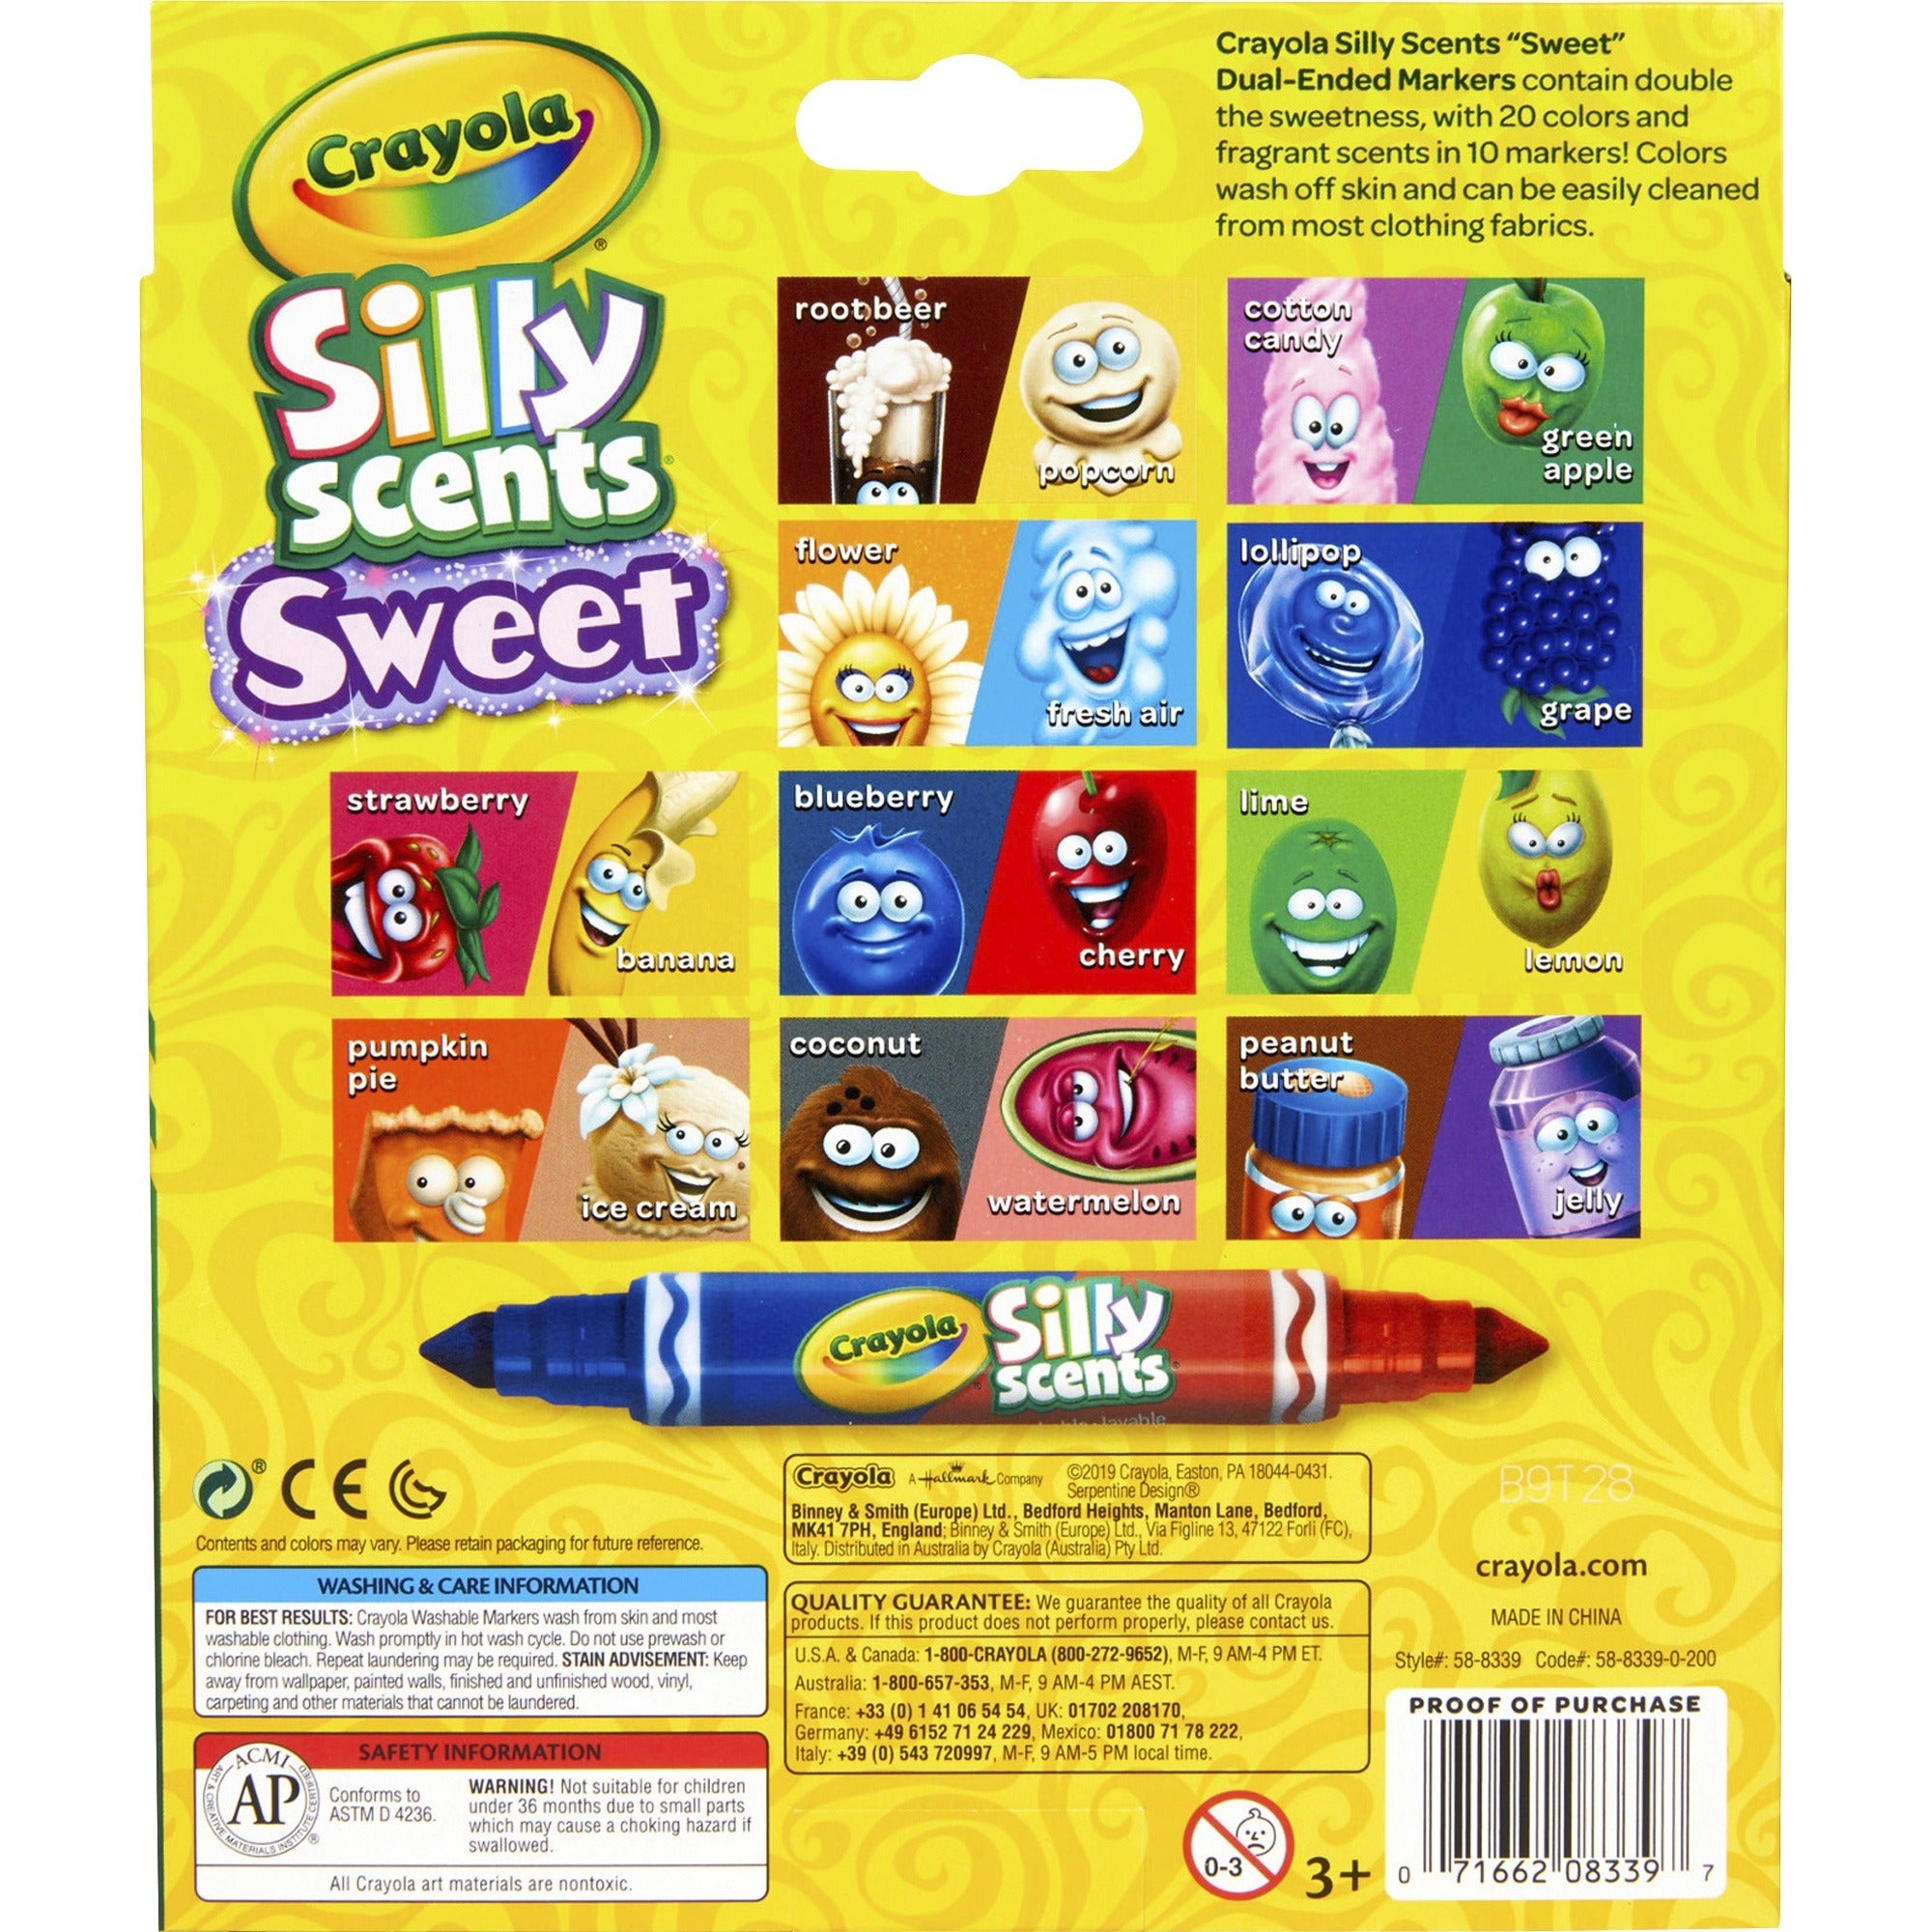 crayola-silly-scents-sweet-dual-ended-markers-assorted-10-set_cyo588339 - 2